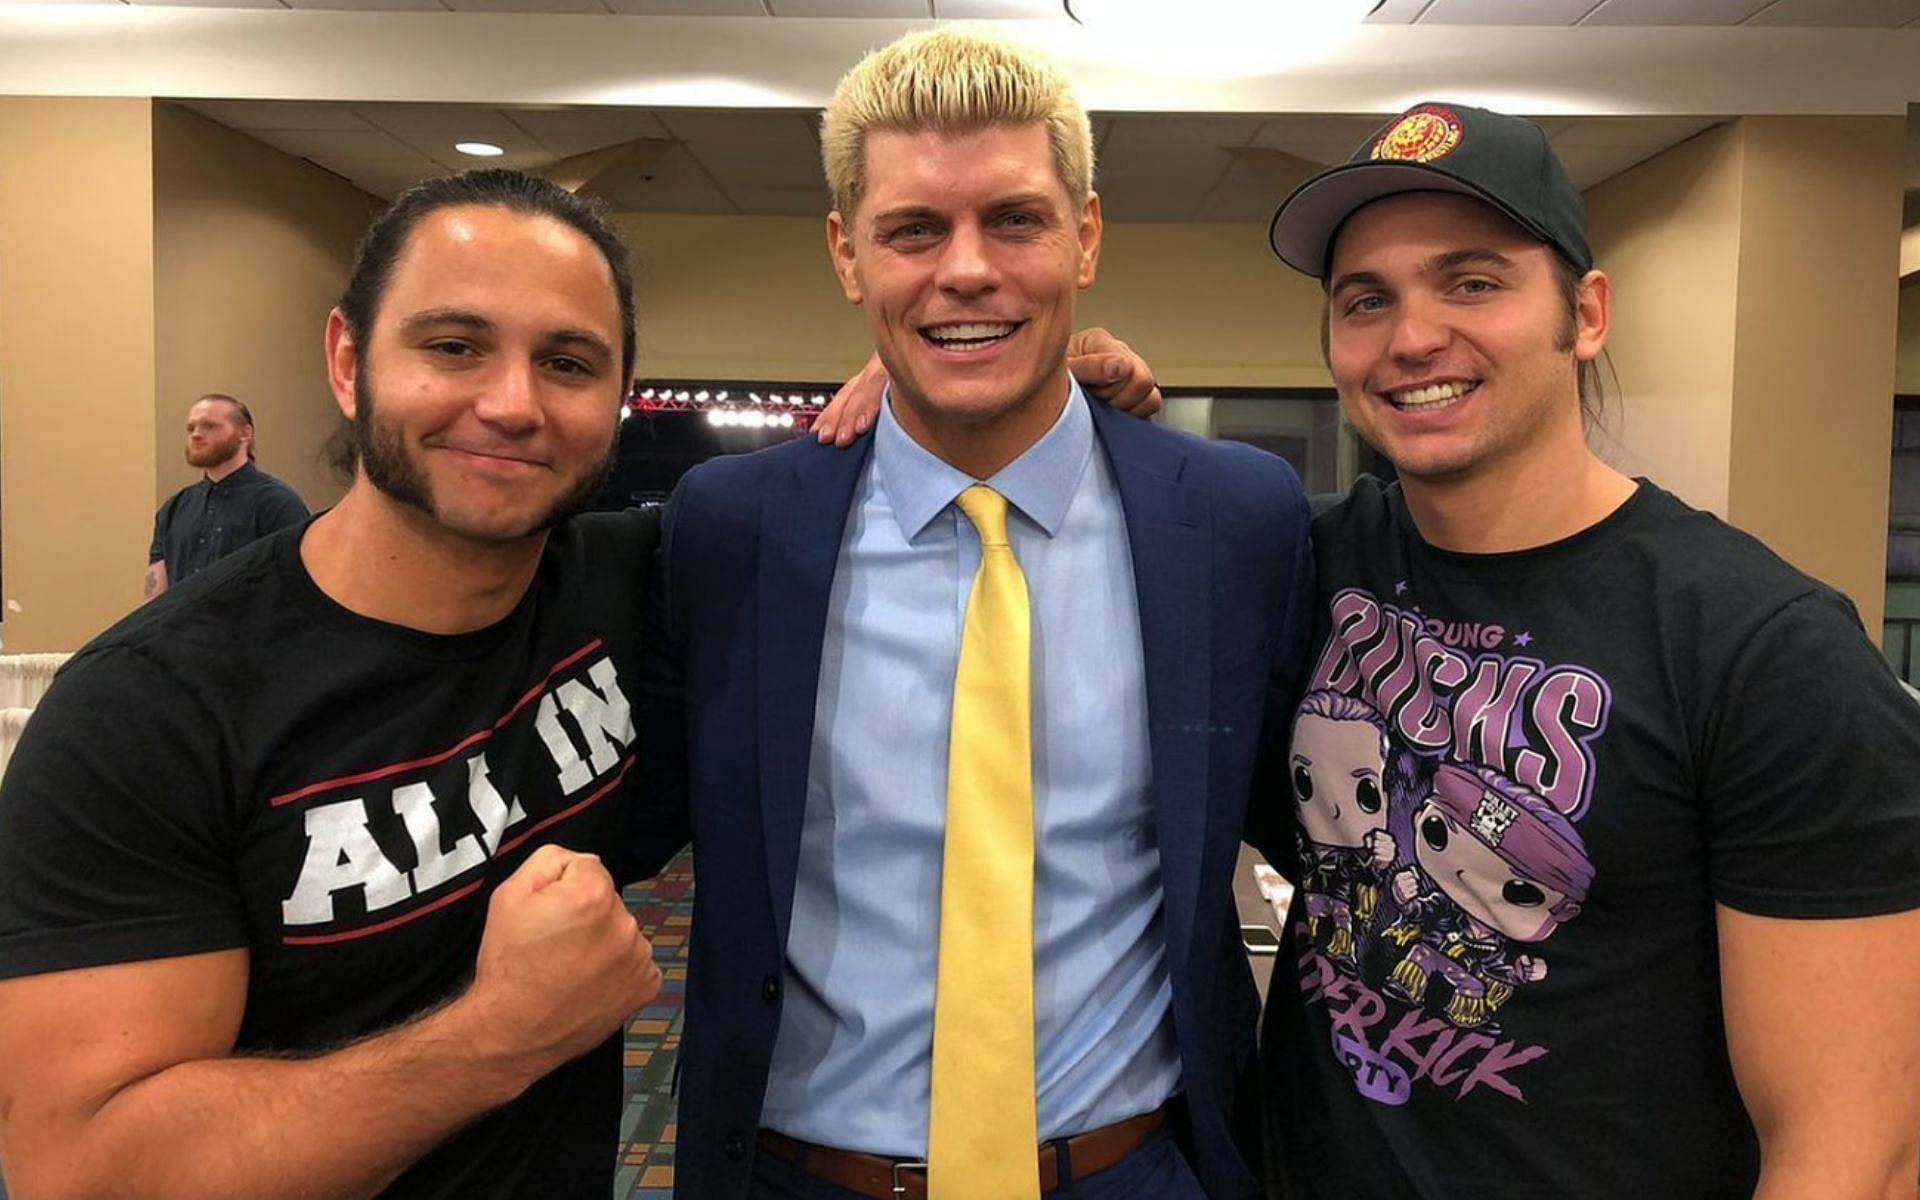 The Young Bucks could join Cody Rhodes if he wins at WrestleMania 39.